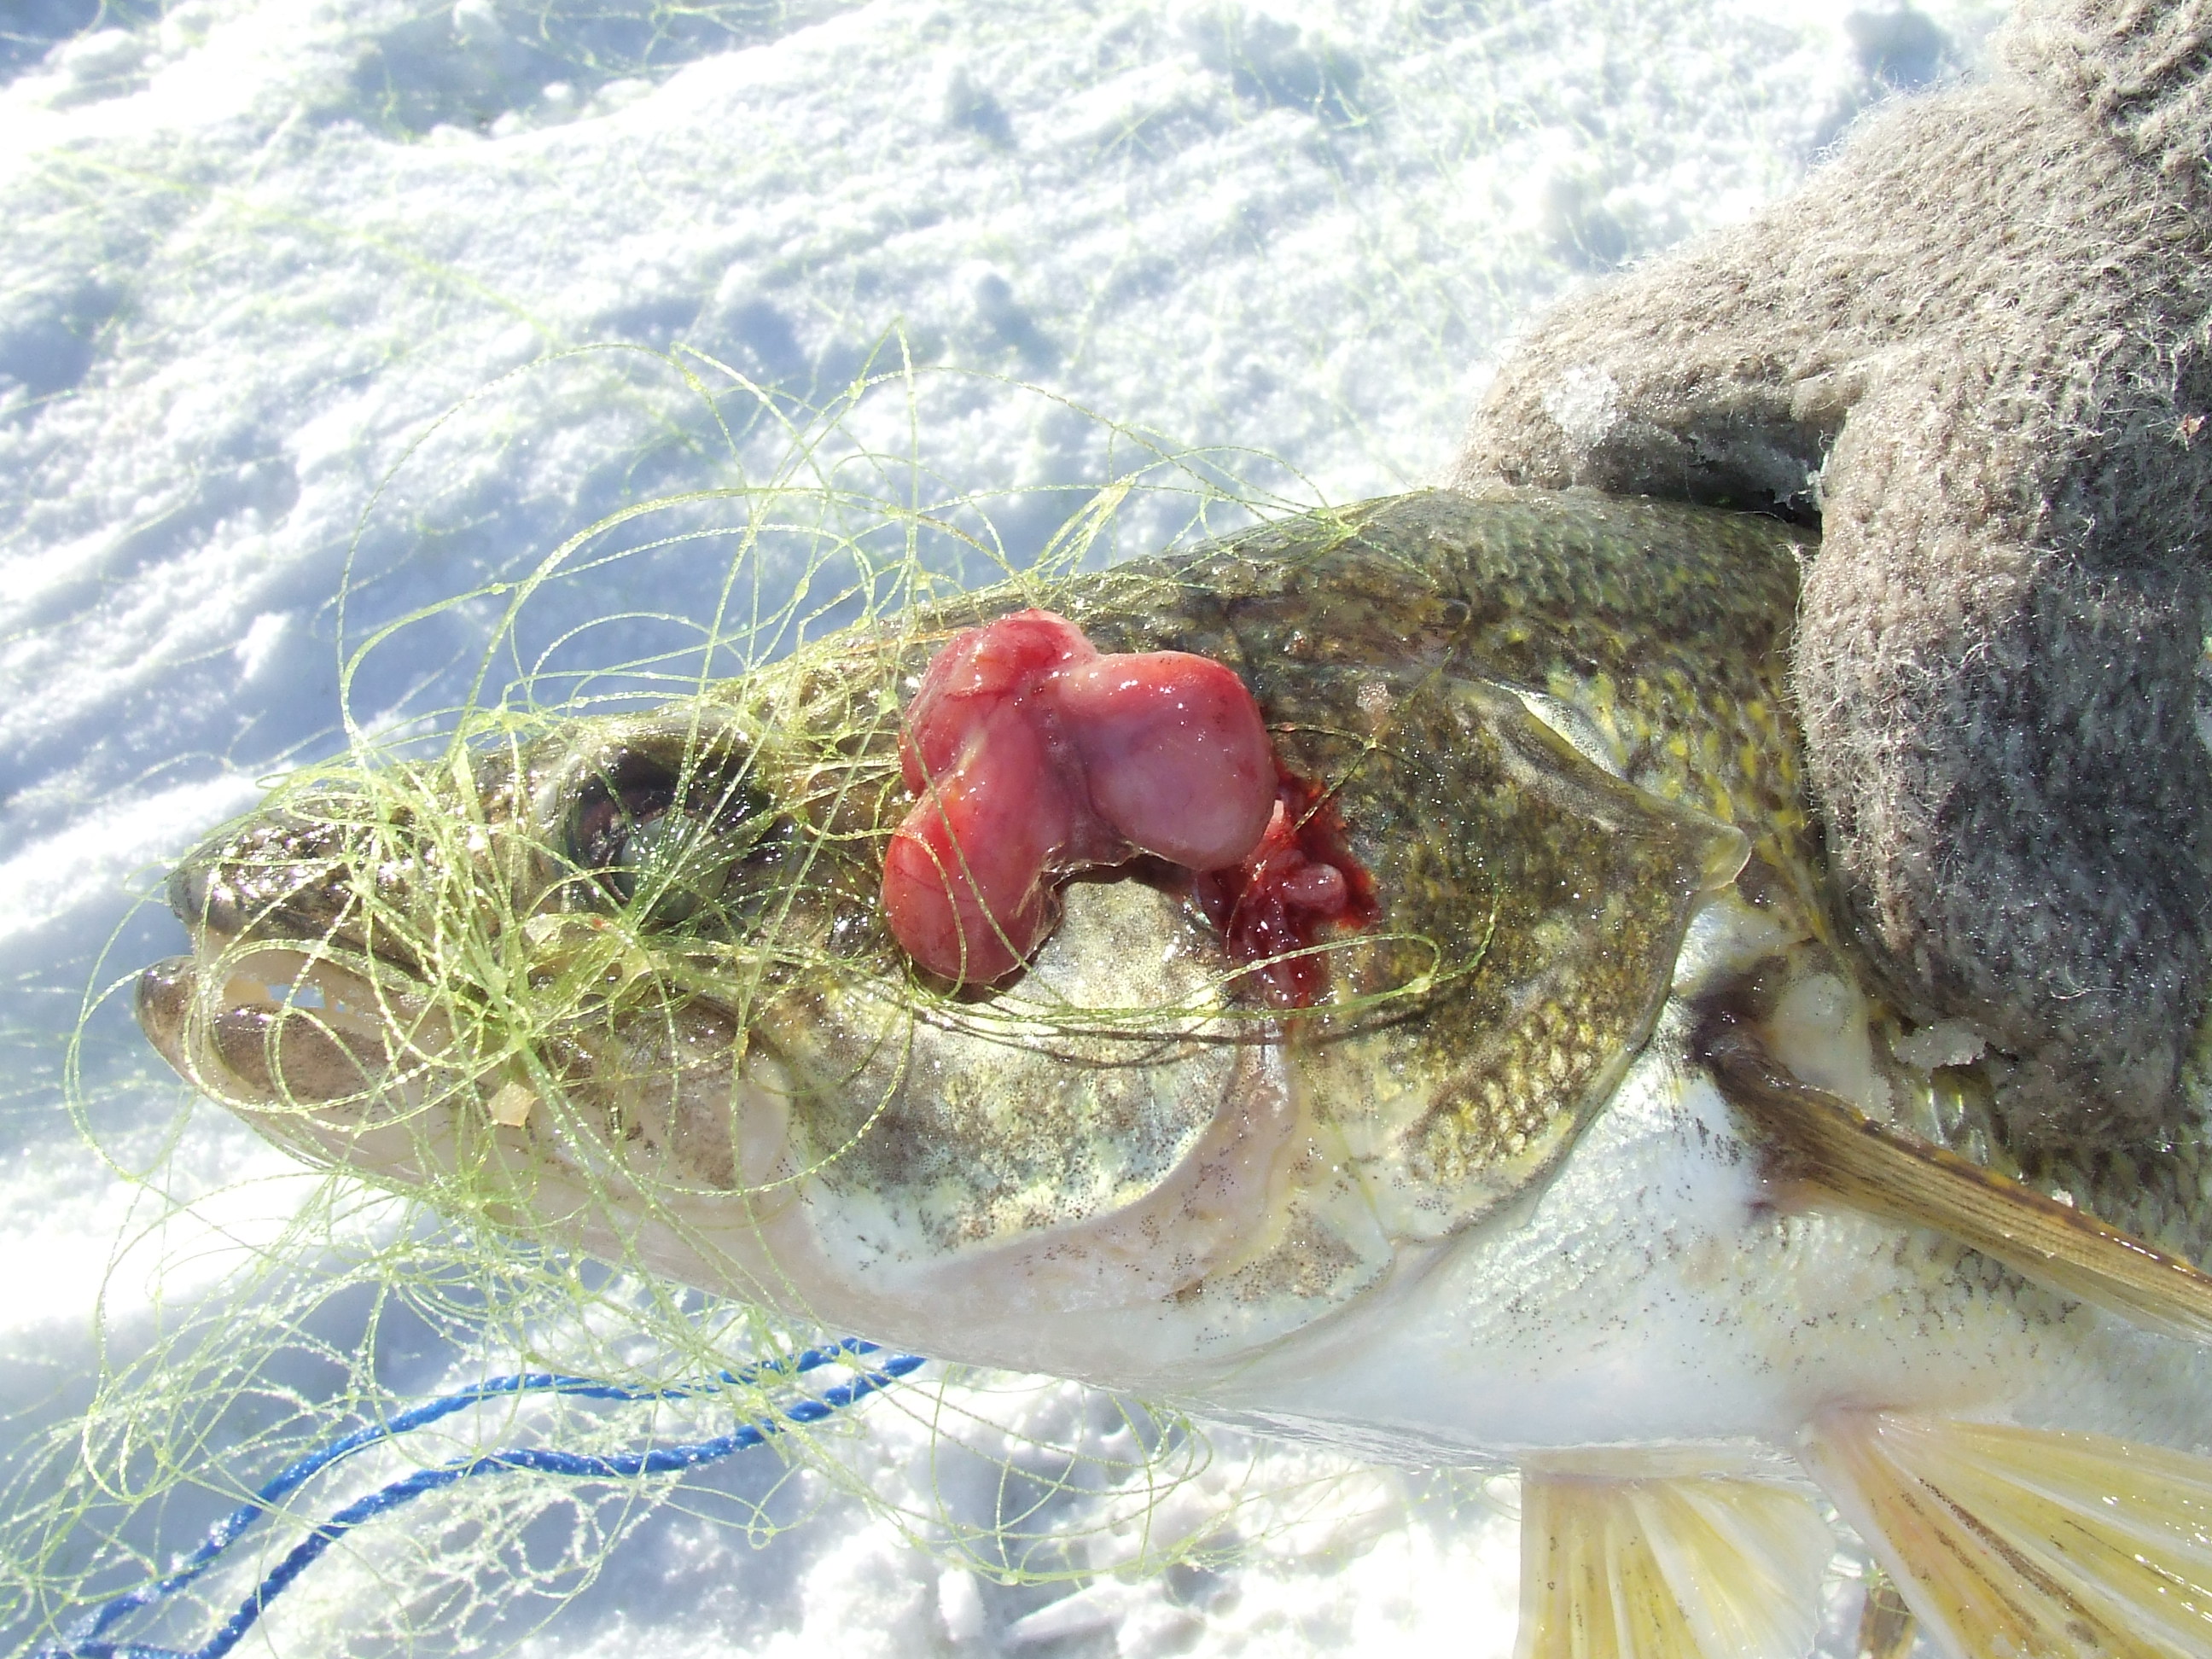 A fish in a net with an external tumour